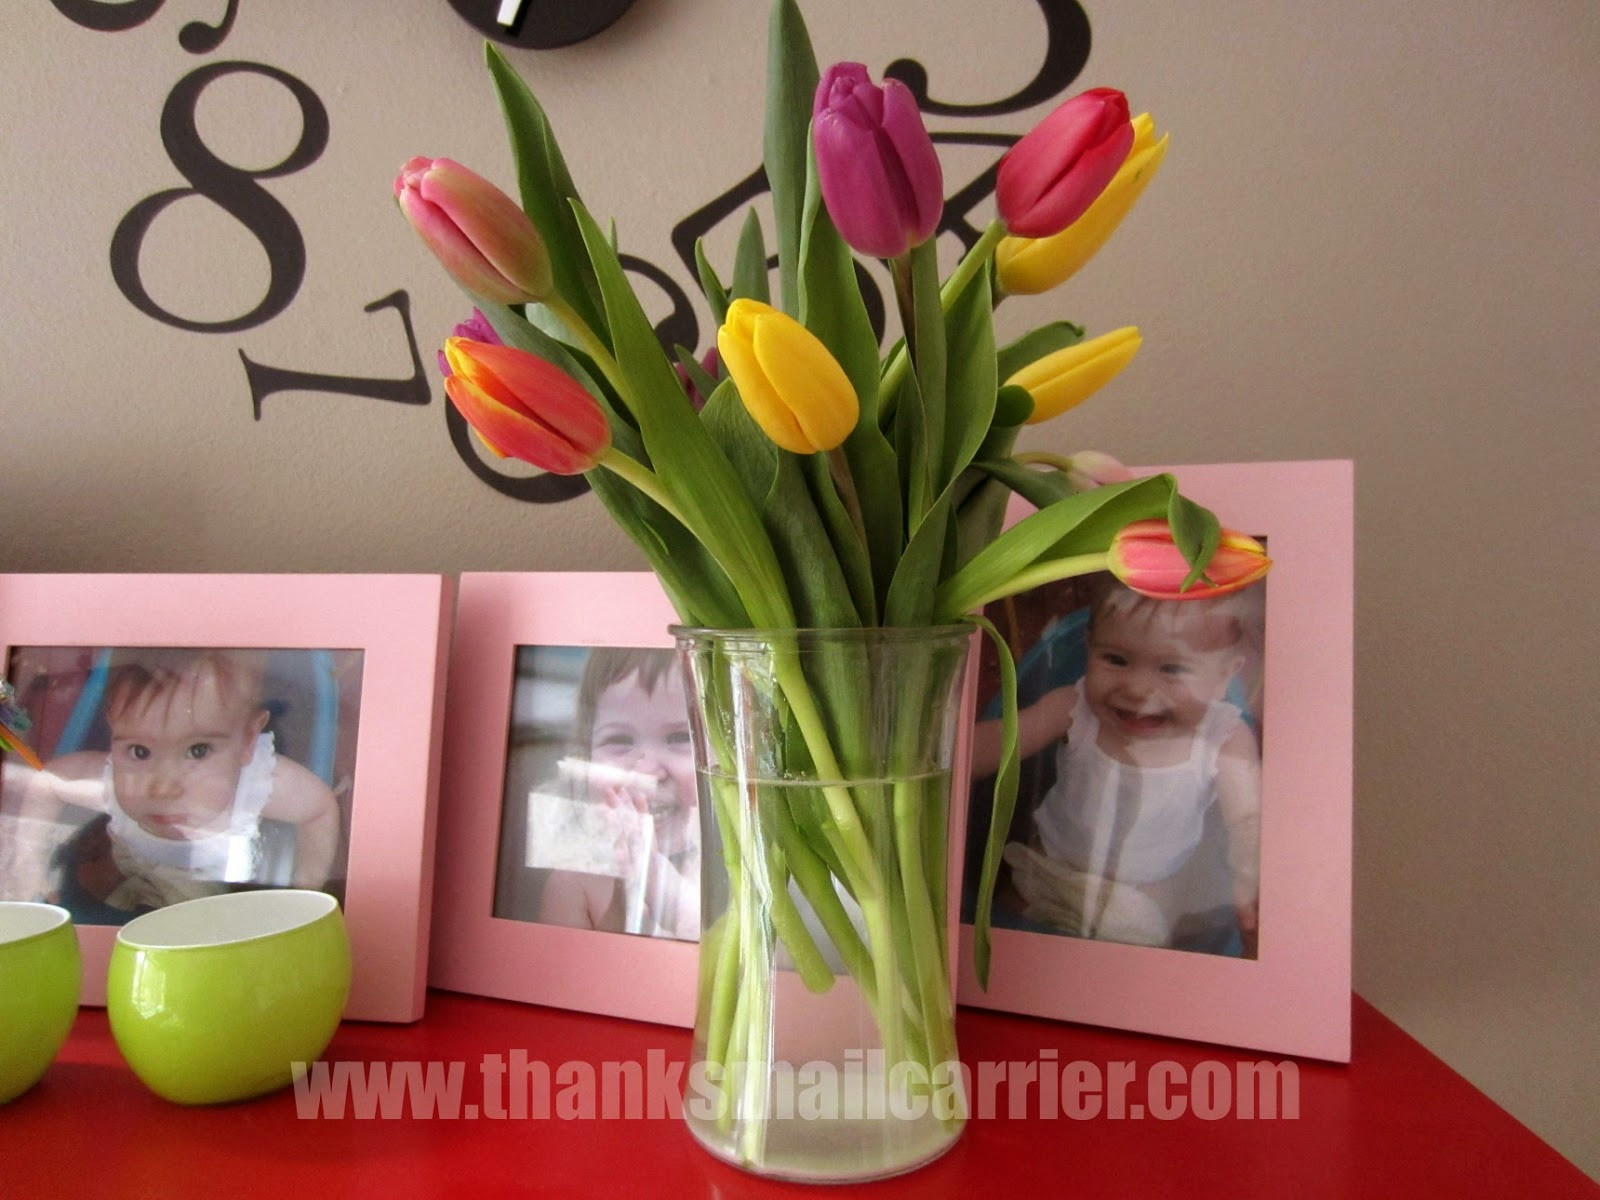 24 Best Tulip Vase for Sale 2024 free download tulip vase for sale of thanks mail carrier celebrate spring with musselmans apple in as this arrangement comes complete with its own glass vase it is simply a stunning way to celebrate a bir